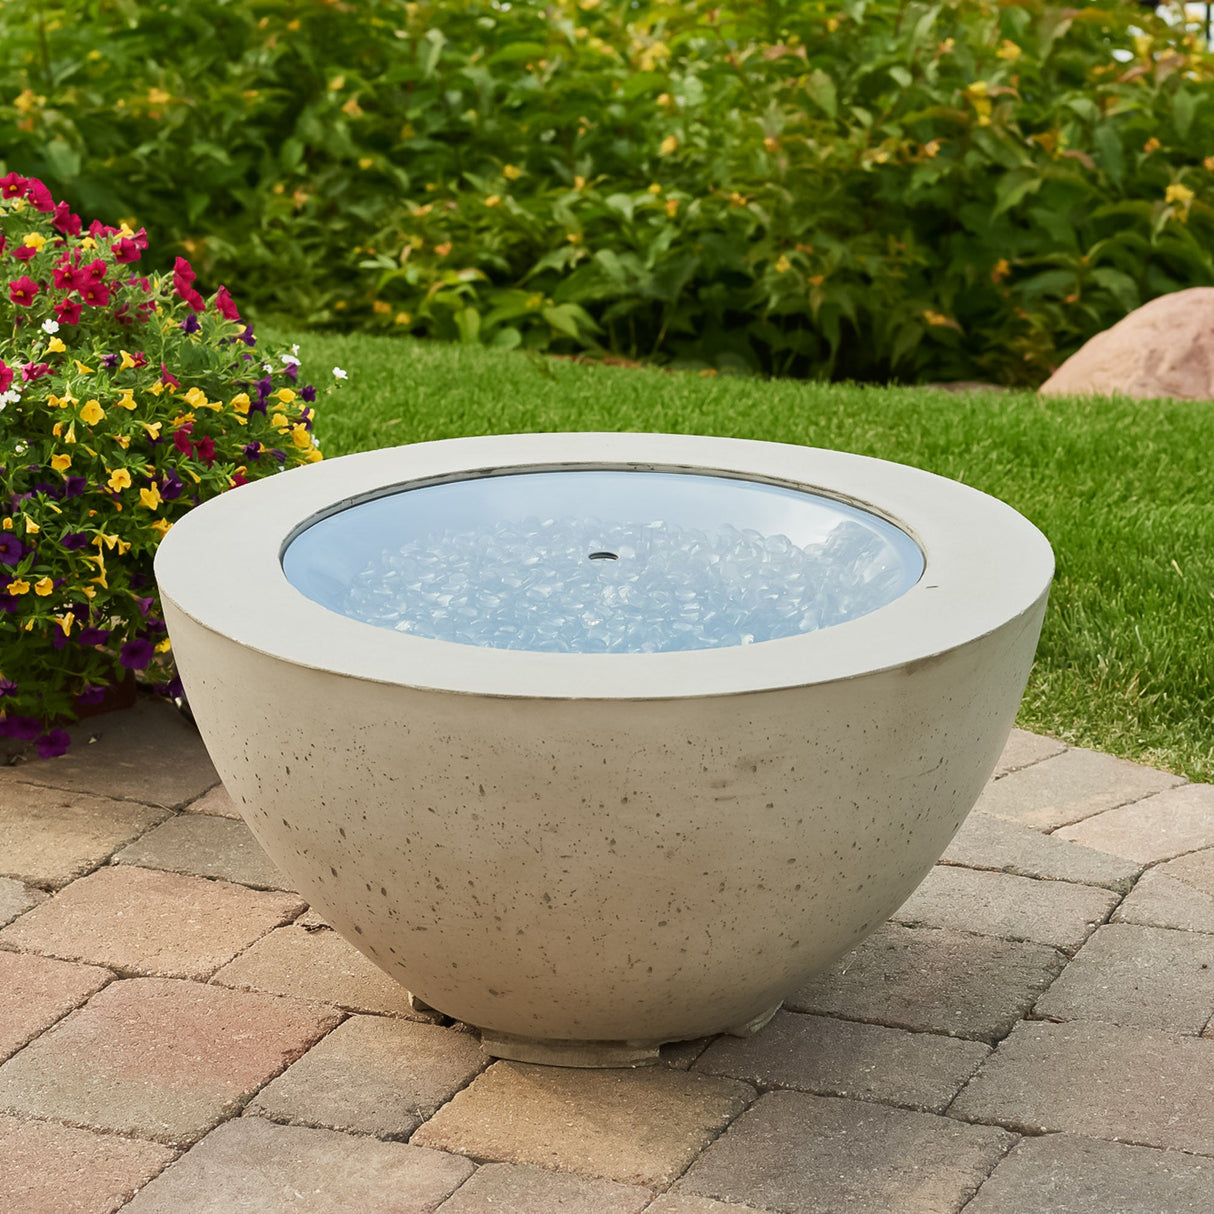 A cover placed on the Cove Round Gas Fire Pit Bowl 29" so it can be used as a table